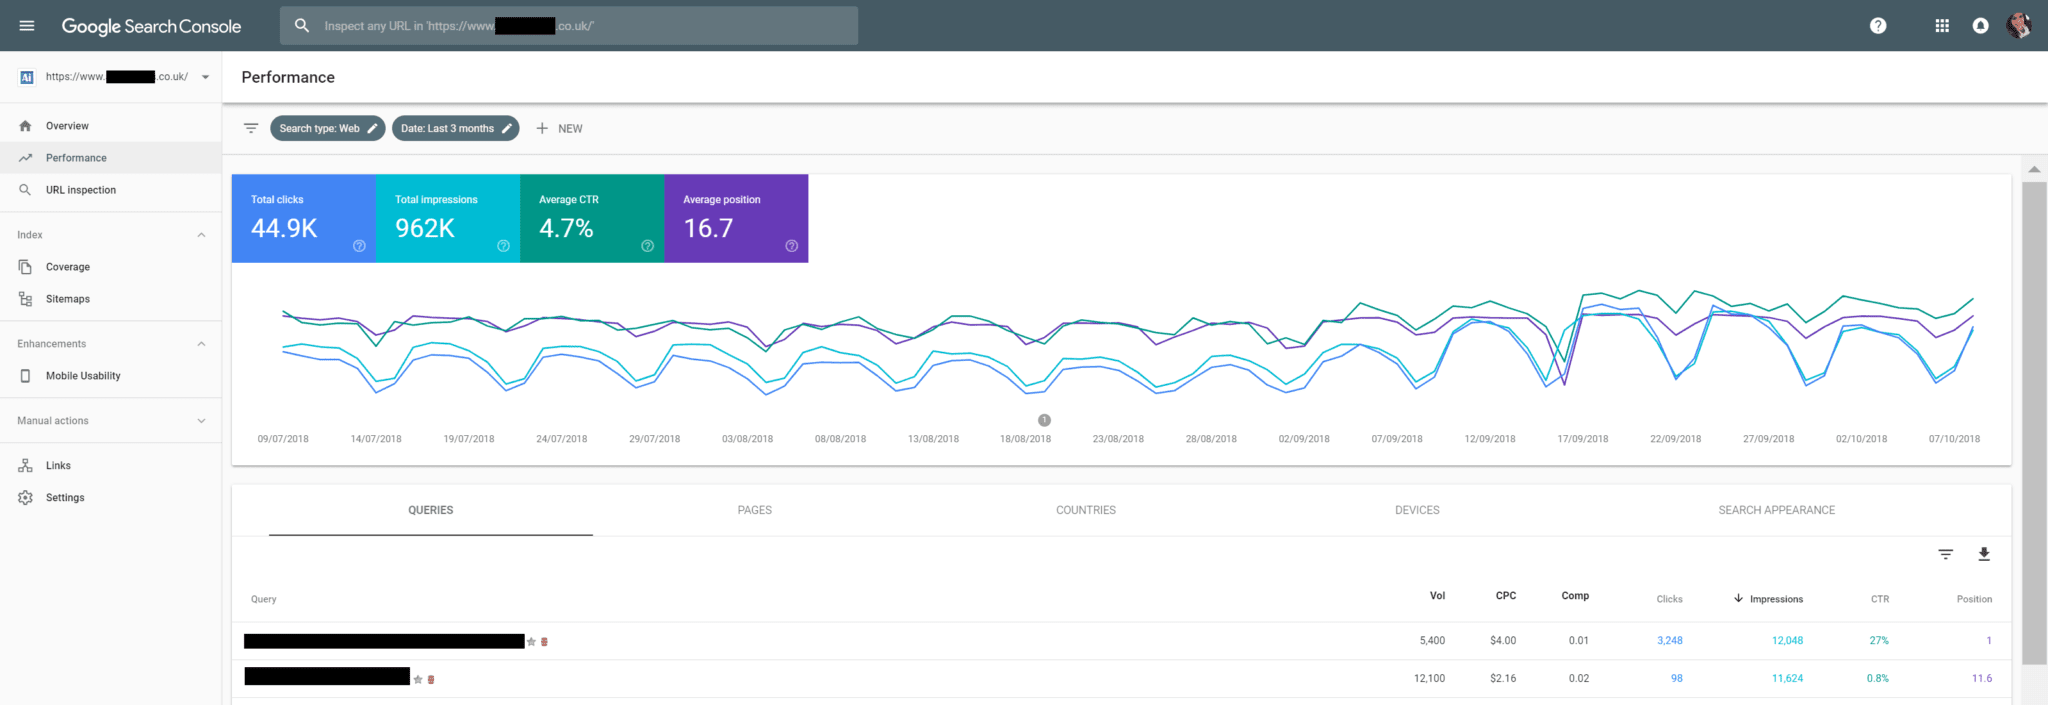 Google Search Console - Performance Report - Average CTR